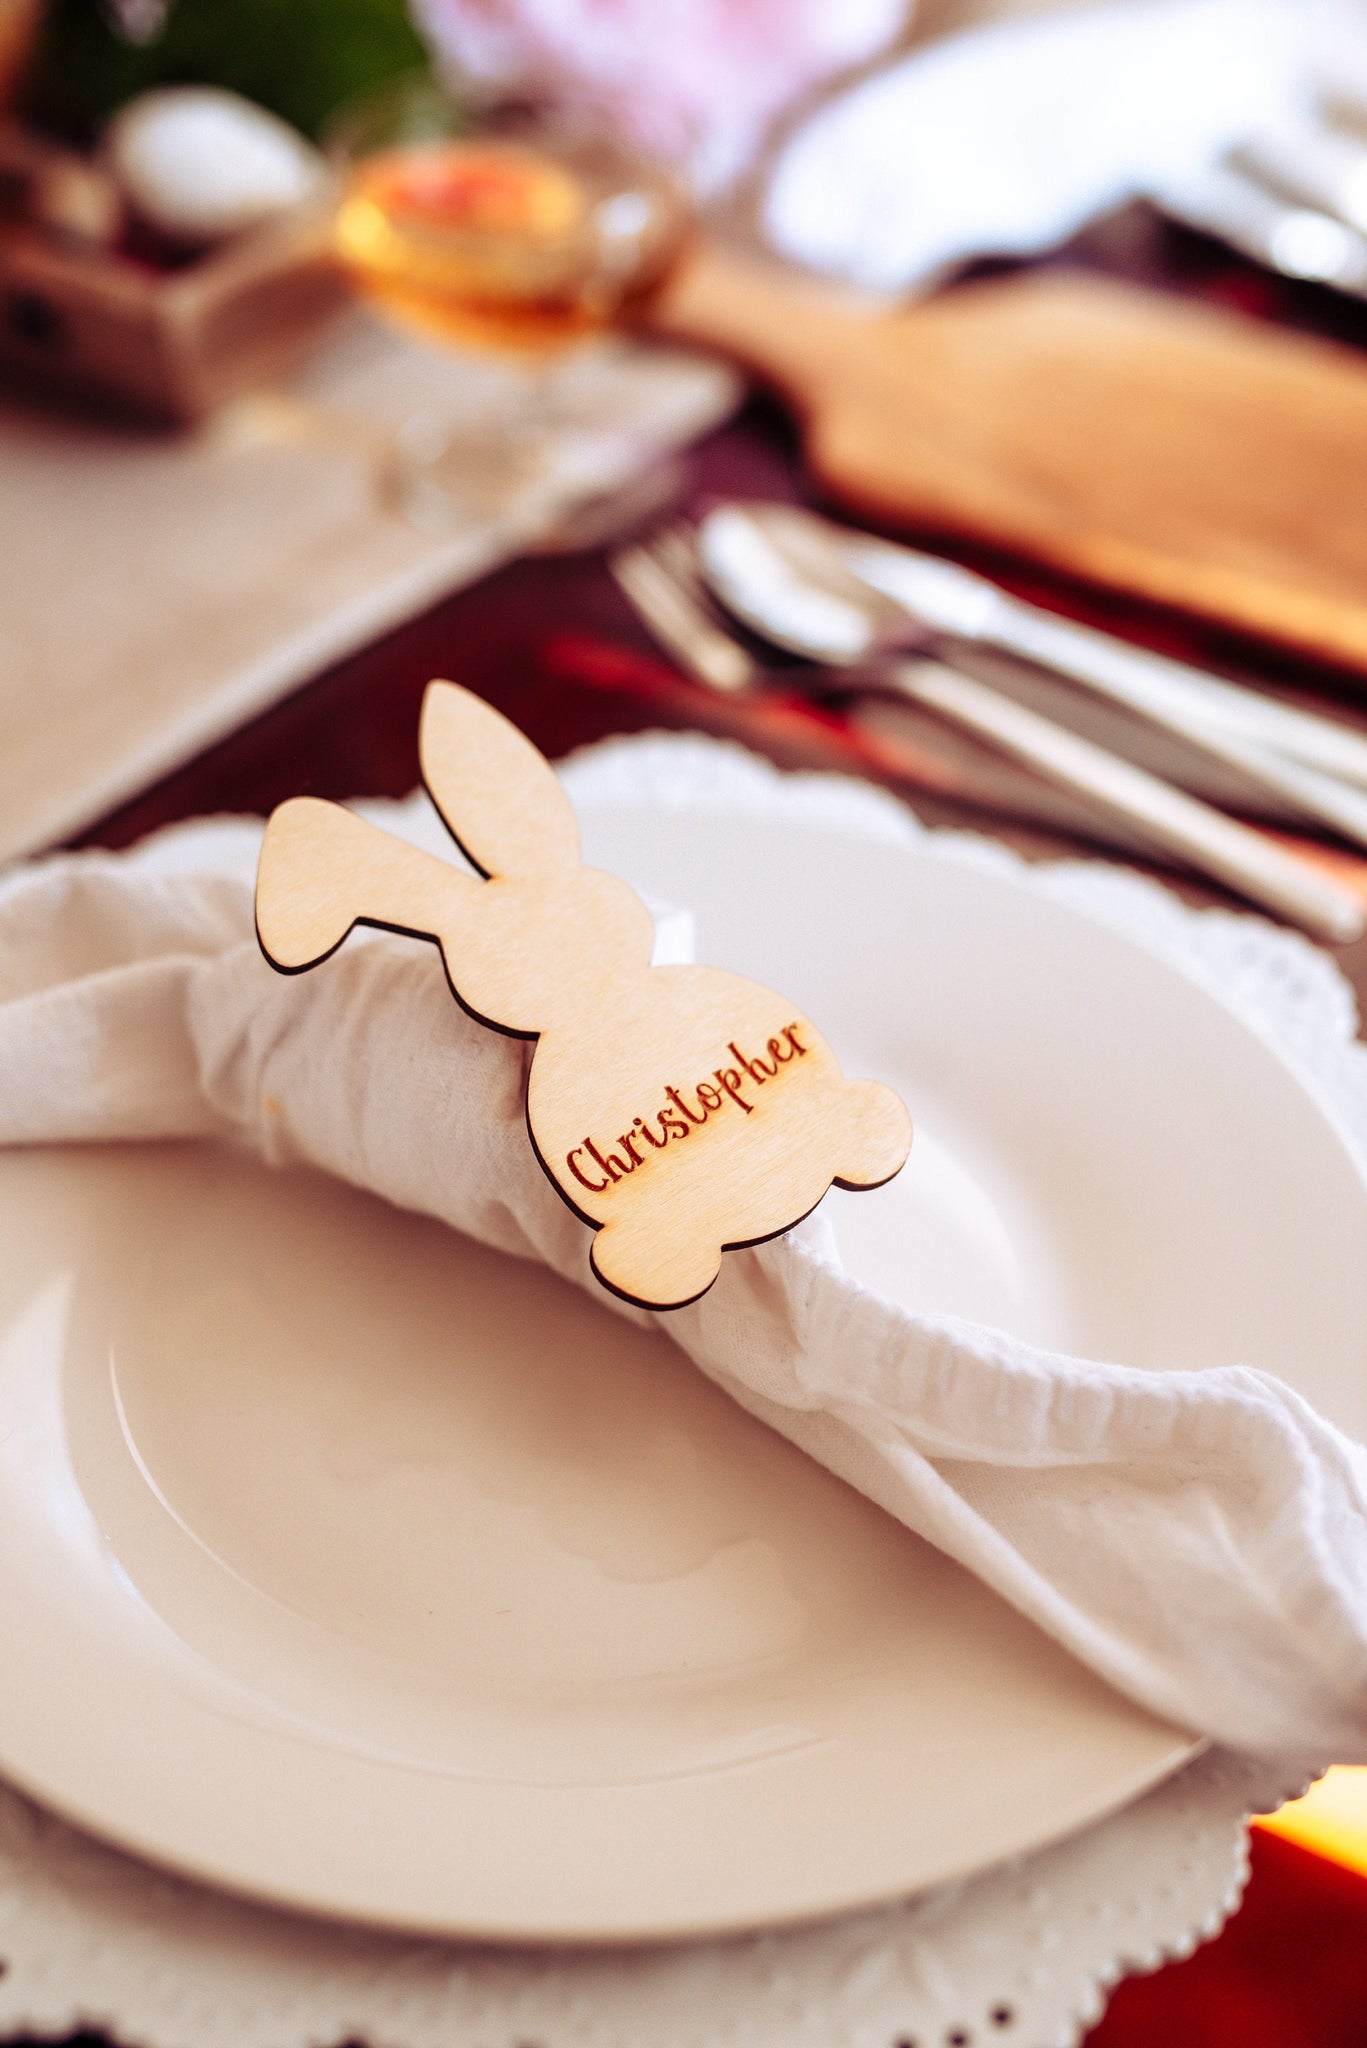 Personalized Bunny Shaped Place Card Combo For Easter Dinner Gathering, Cute Custom Holiday Name Place Holder Card For Holiday Dinner Party